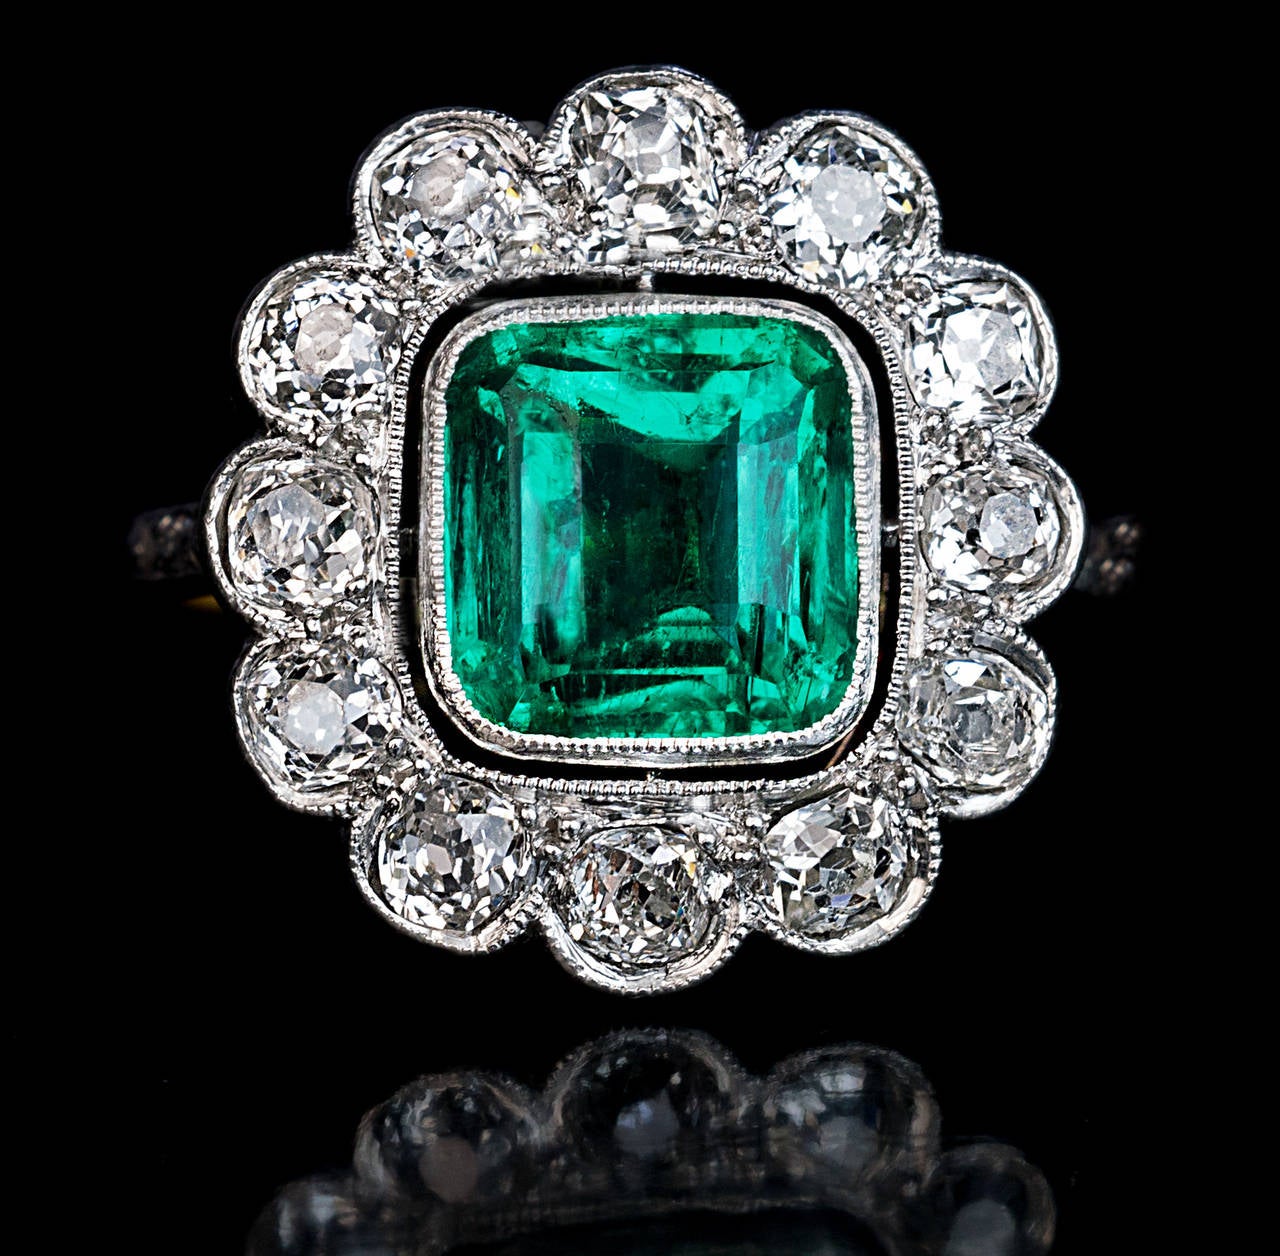 French, circa 1915

platinum over 18K gold, 
estimated emerald weight 2.25 ct, 
12 old European cut and 6 old rose cut diamonds - approximate total weight 1.30 ct

marked with maker's initials, eagle and dog shaped French marks for 18K gold